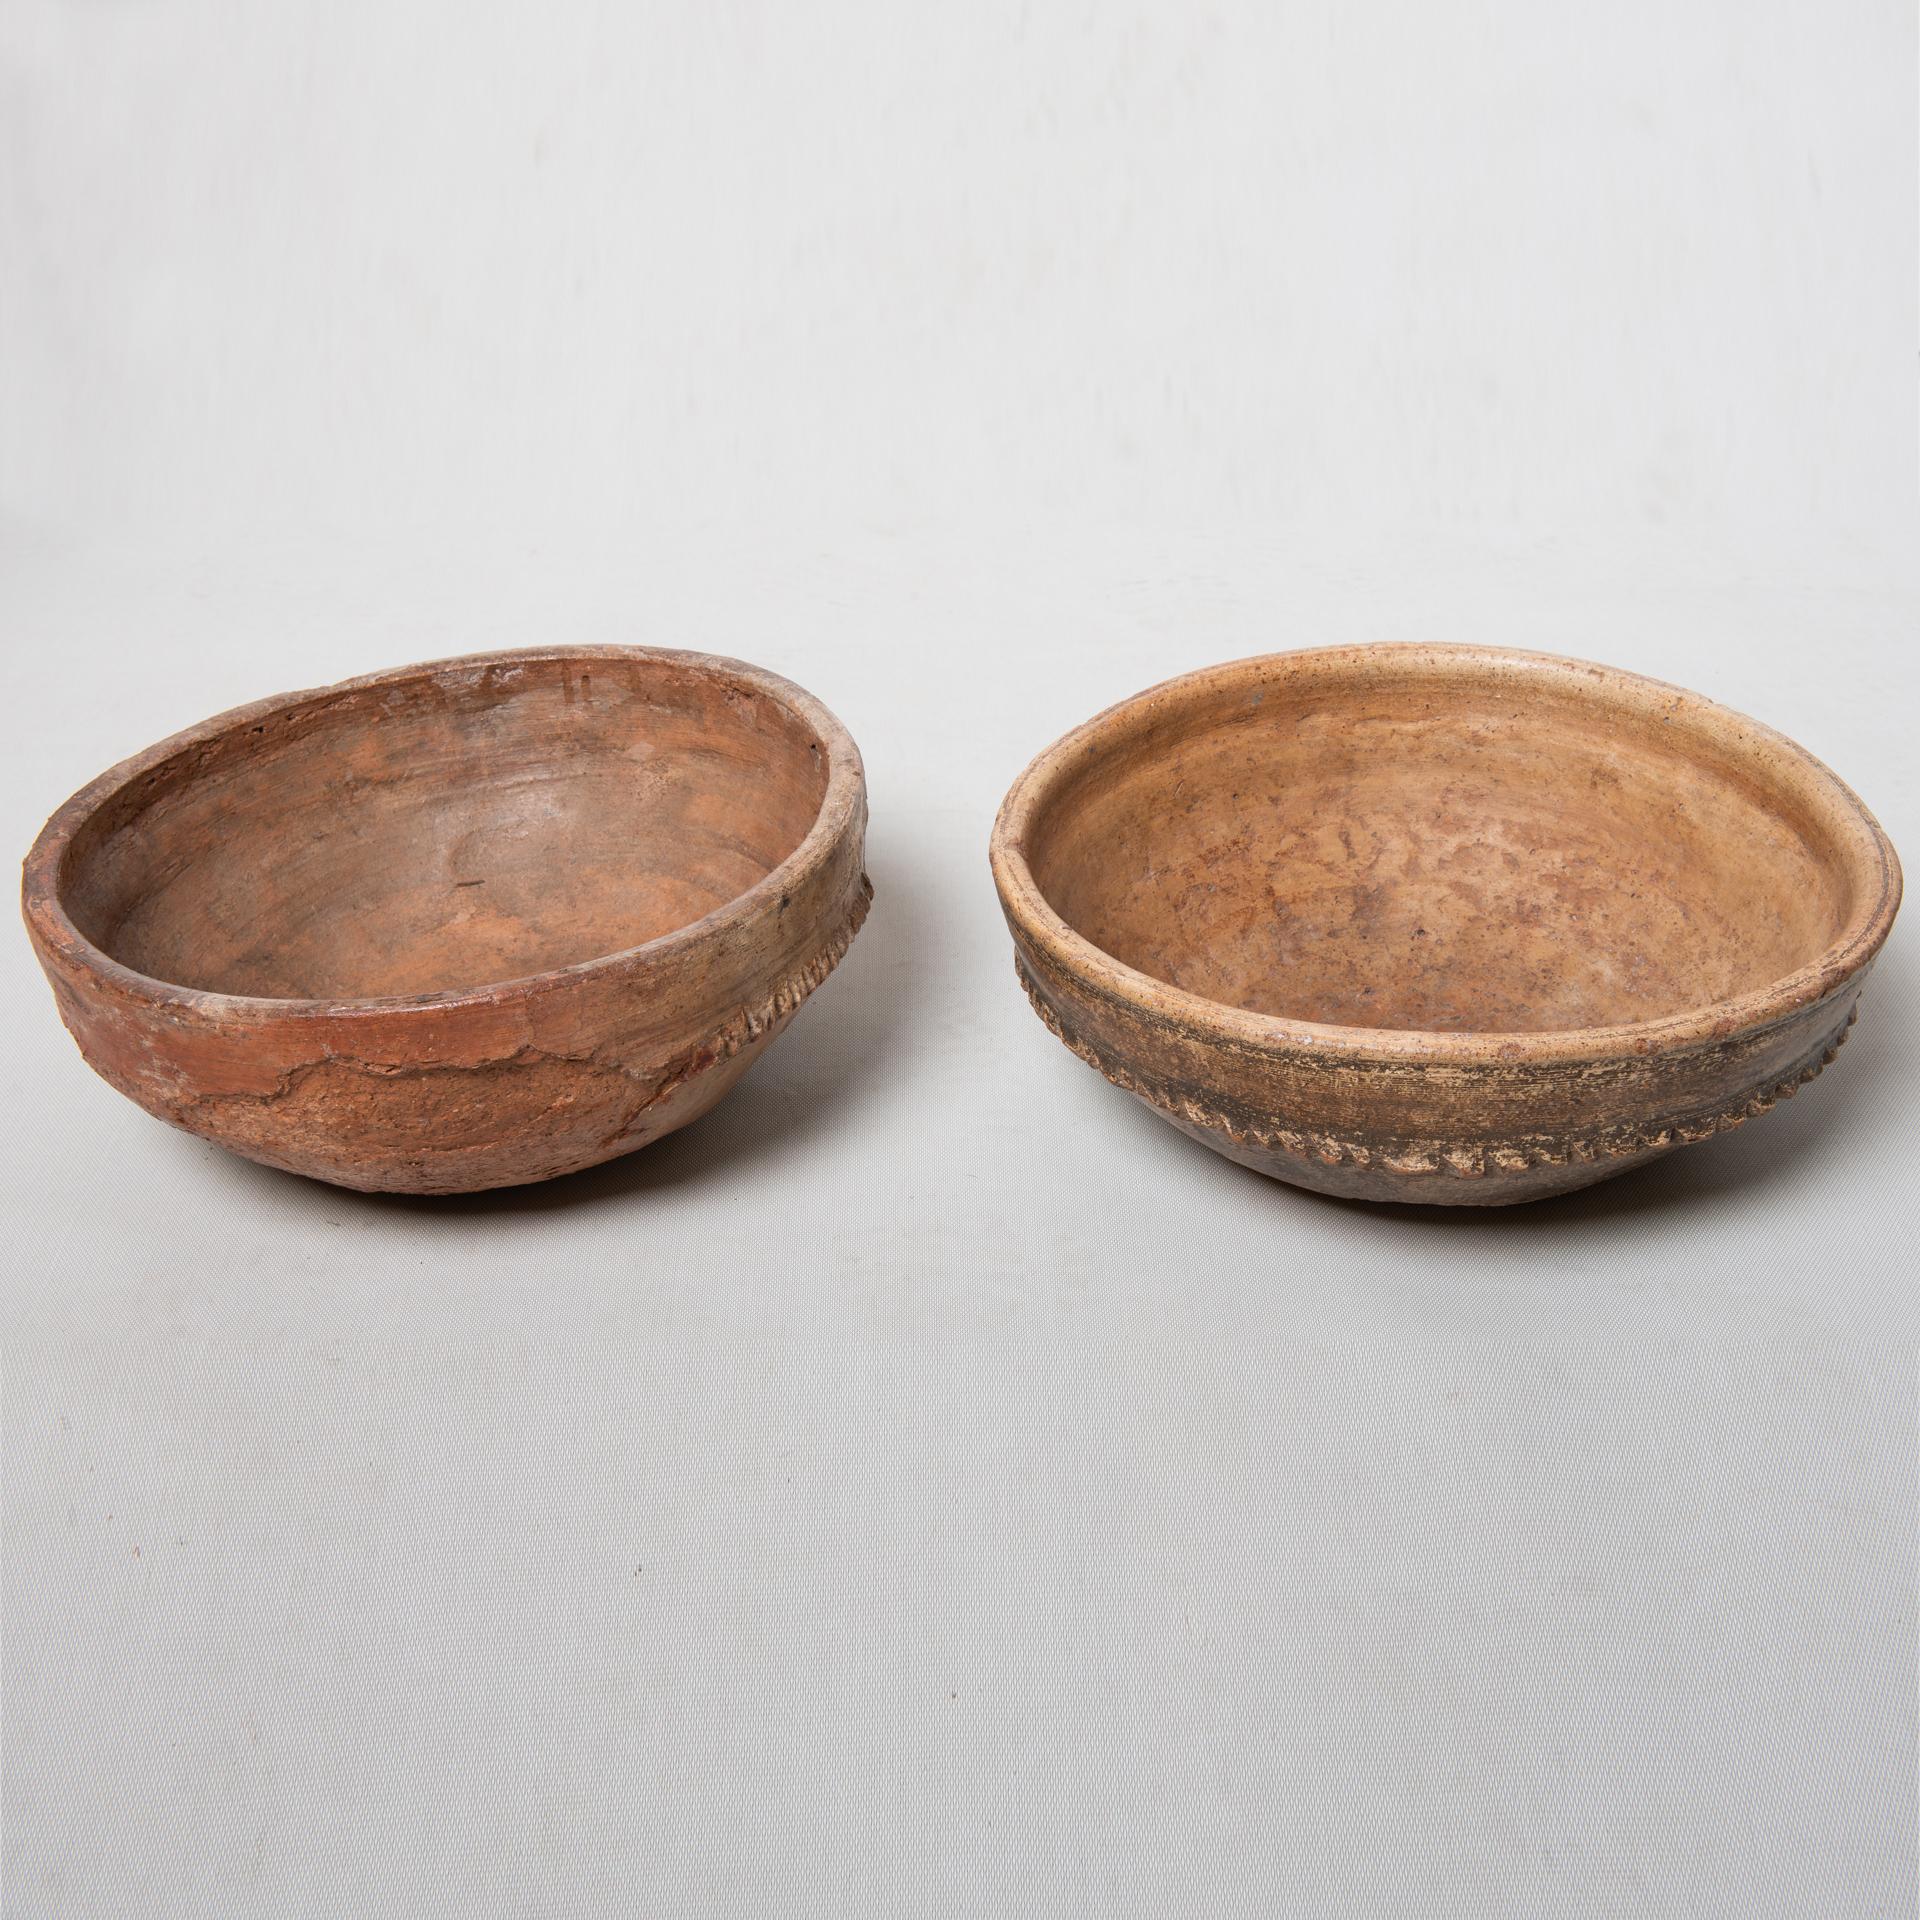 20th Century Berber Old Earthenware Bowls and Lids from Morocco For Sale